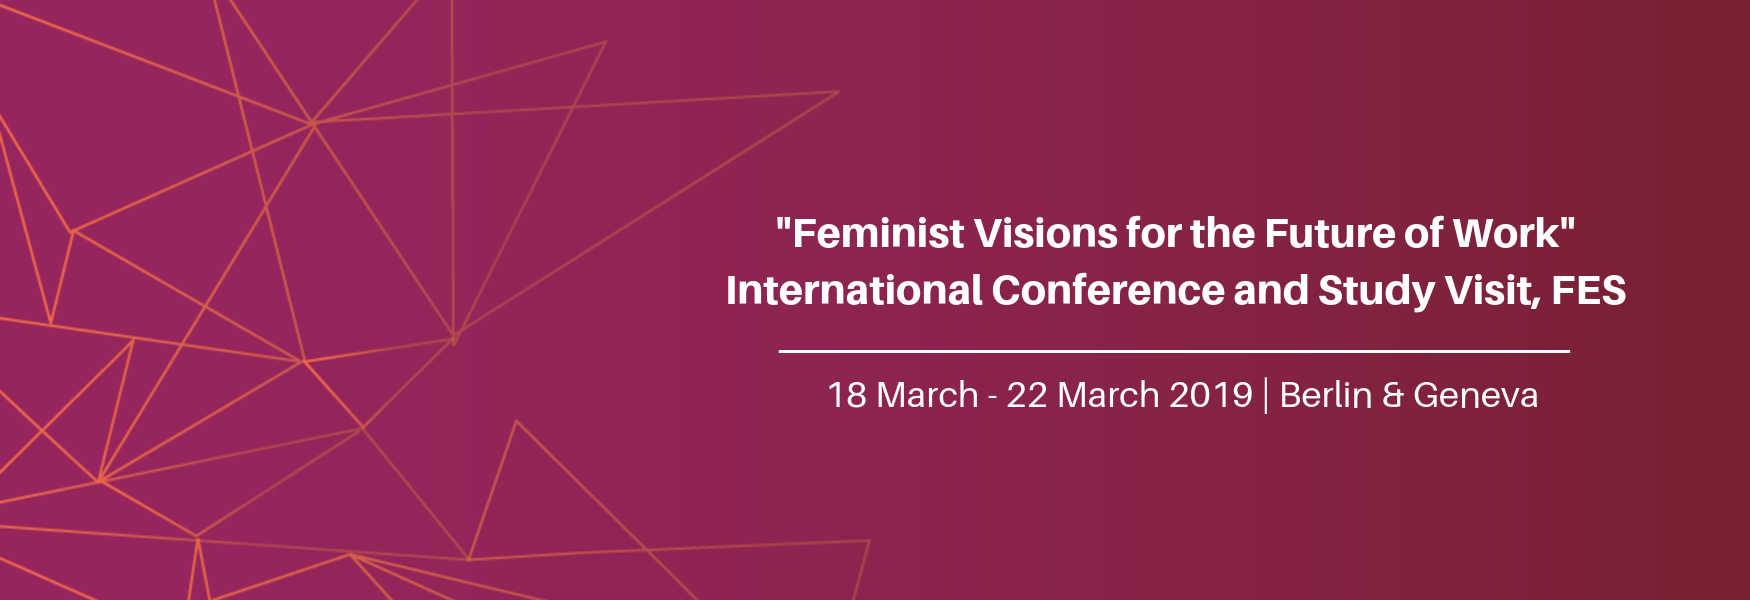 "Feminist Visions for the Future of Work" International Conference and Study Visit